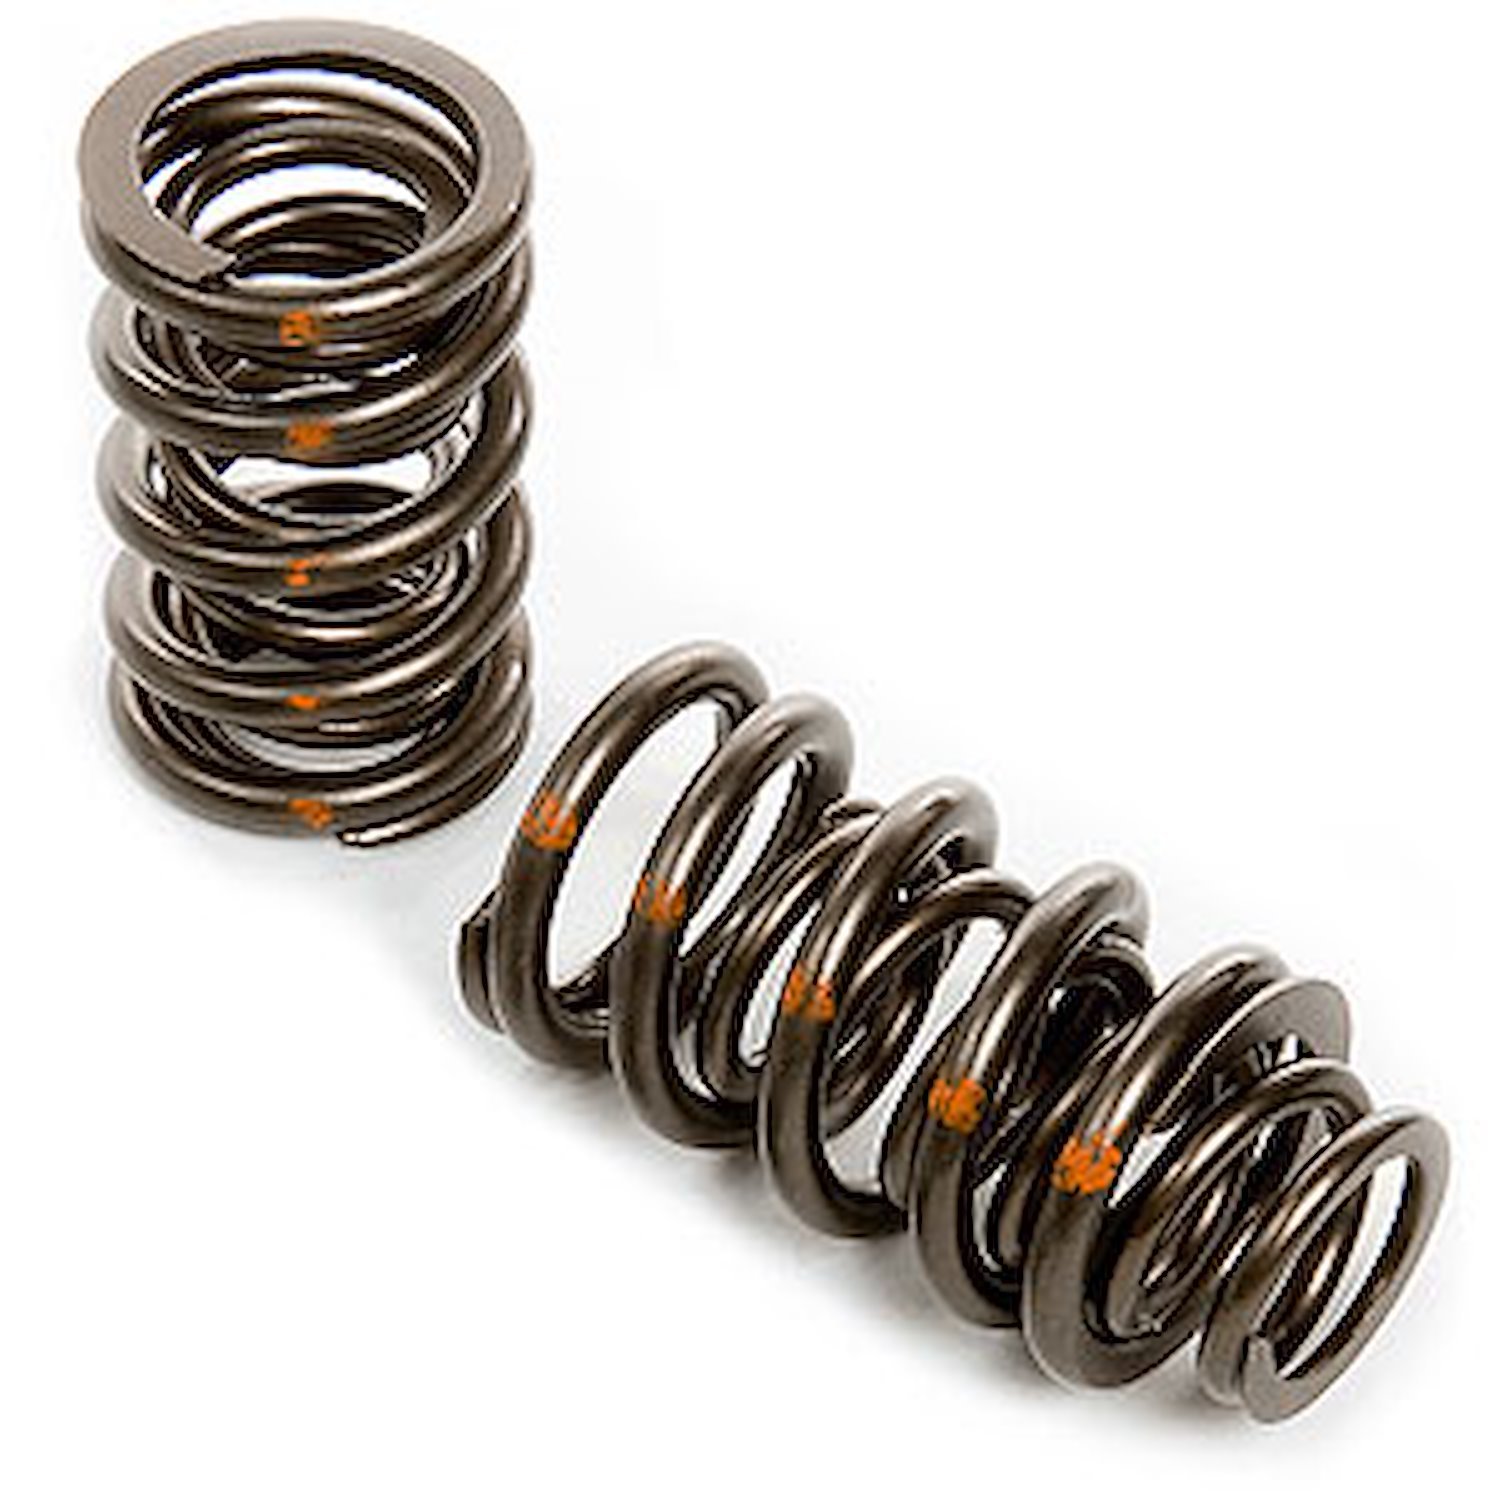 PAC Racing Dual Springs, Orange Stripe for Solid Roller Cam 1.550 in. O.D. .800 I.D. [16]